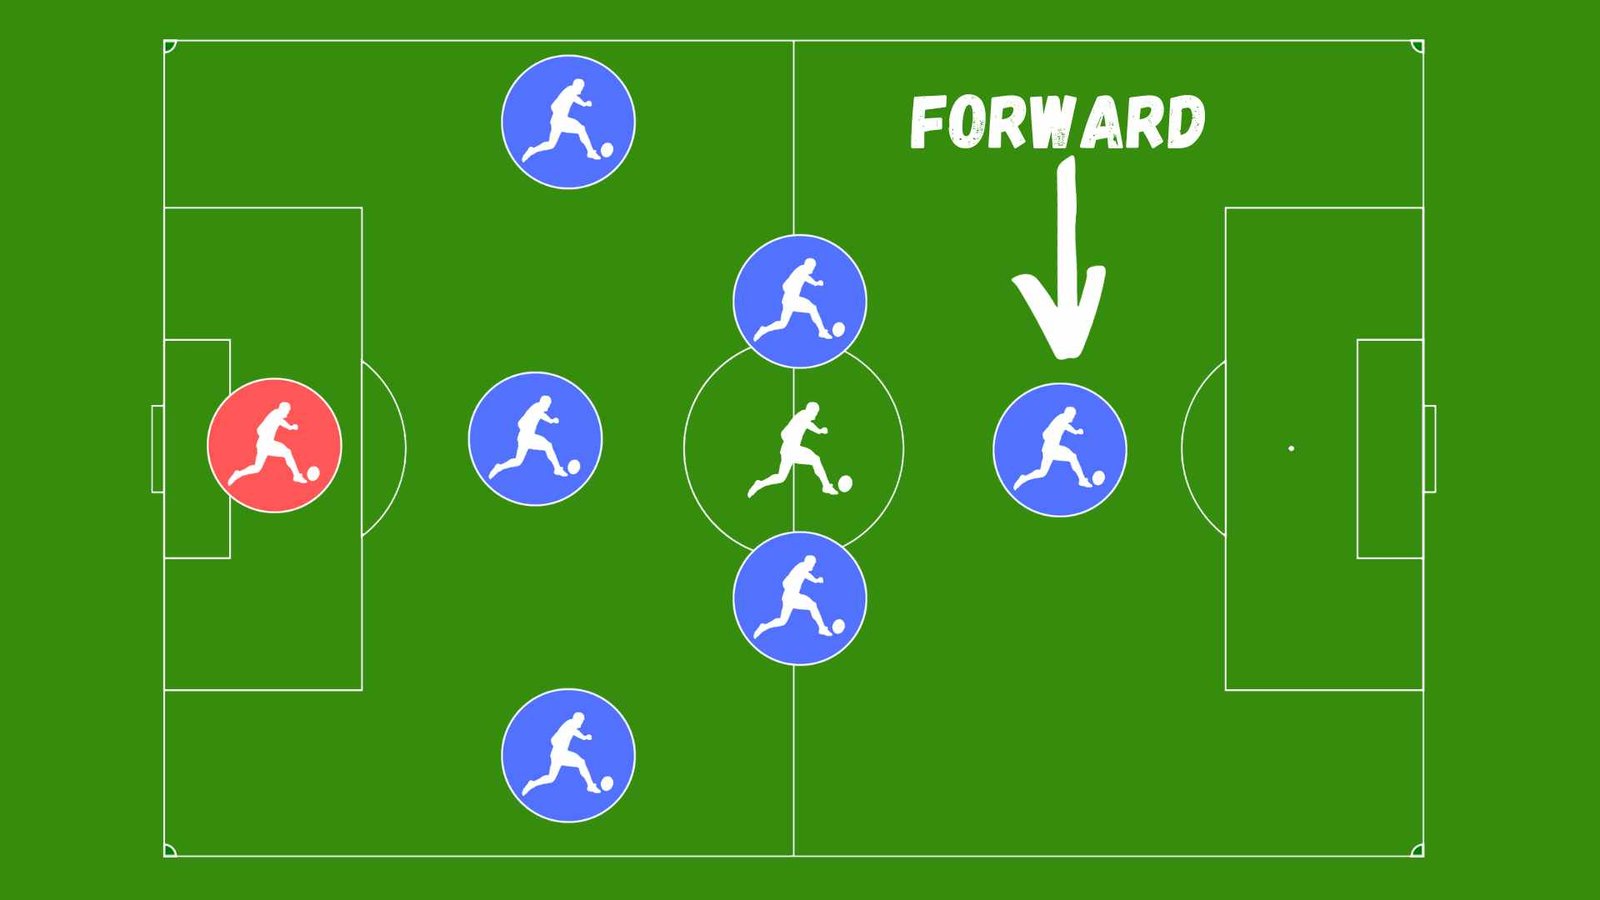 The 3-2-1 soccer format 